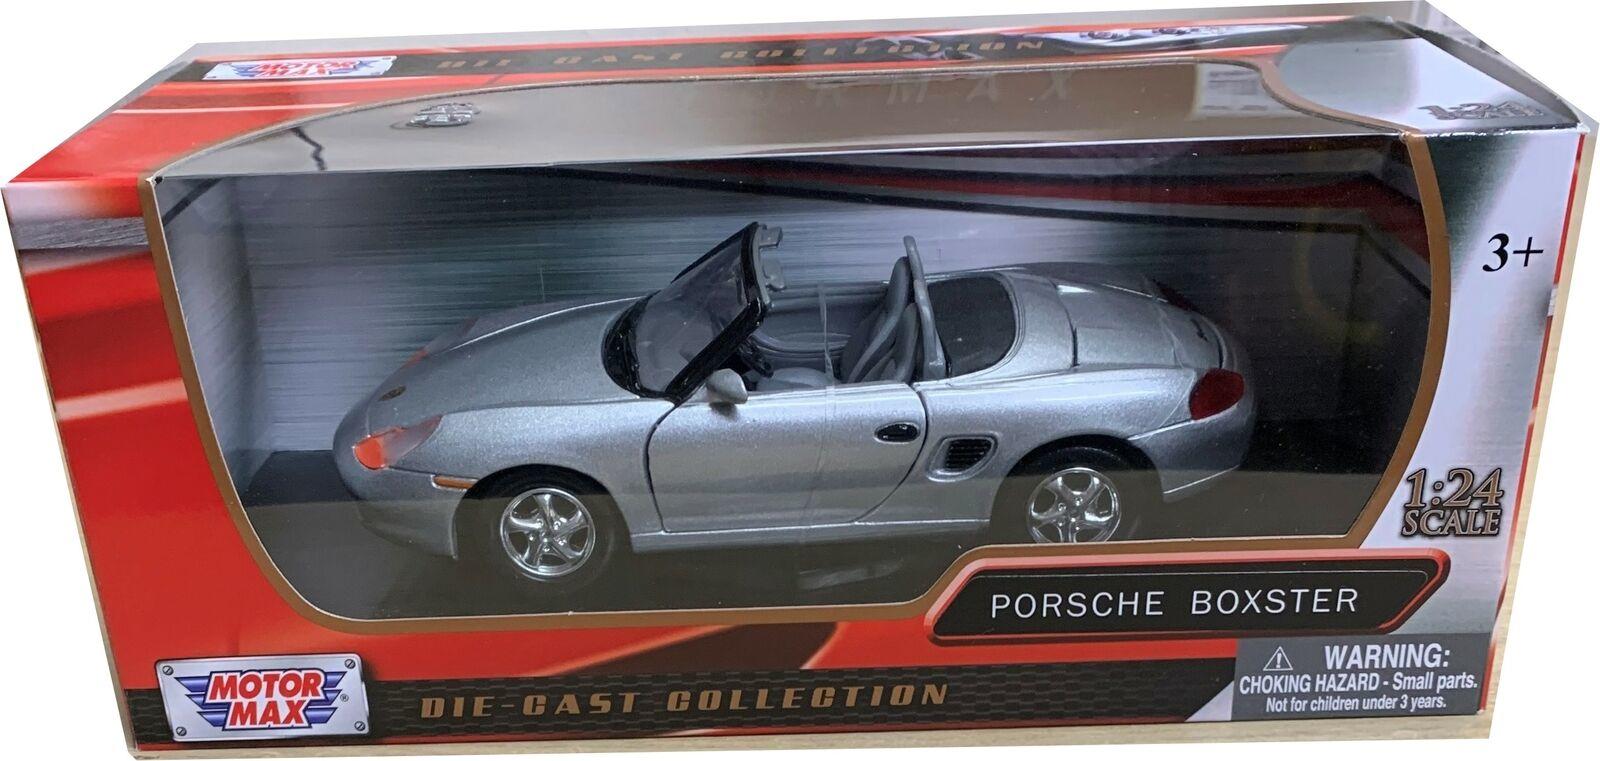 The car is approx 17.5 cm long and the presentation box is 24.5 cm long, Porsche Boxster in silver 1:24 scale model from Motormax